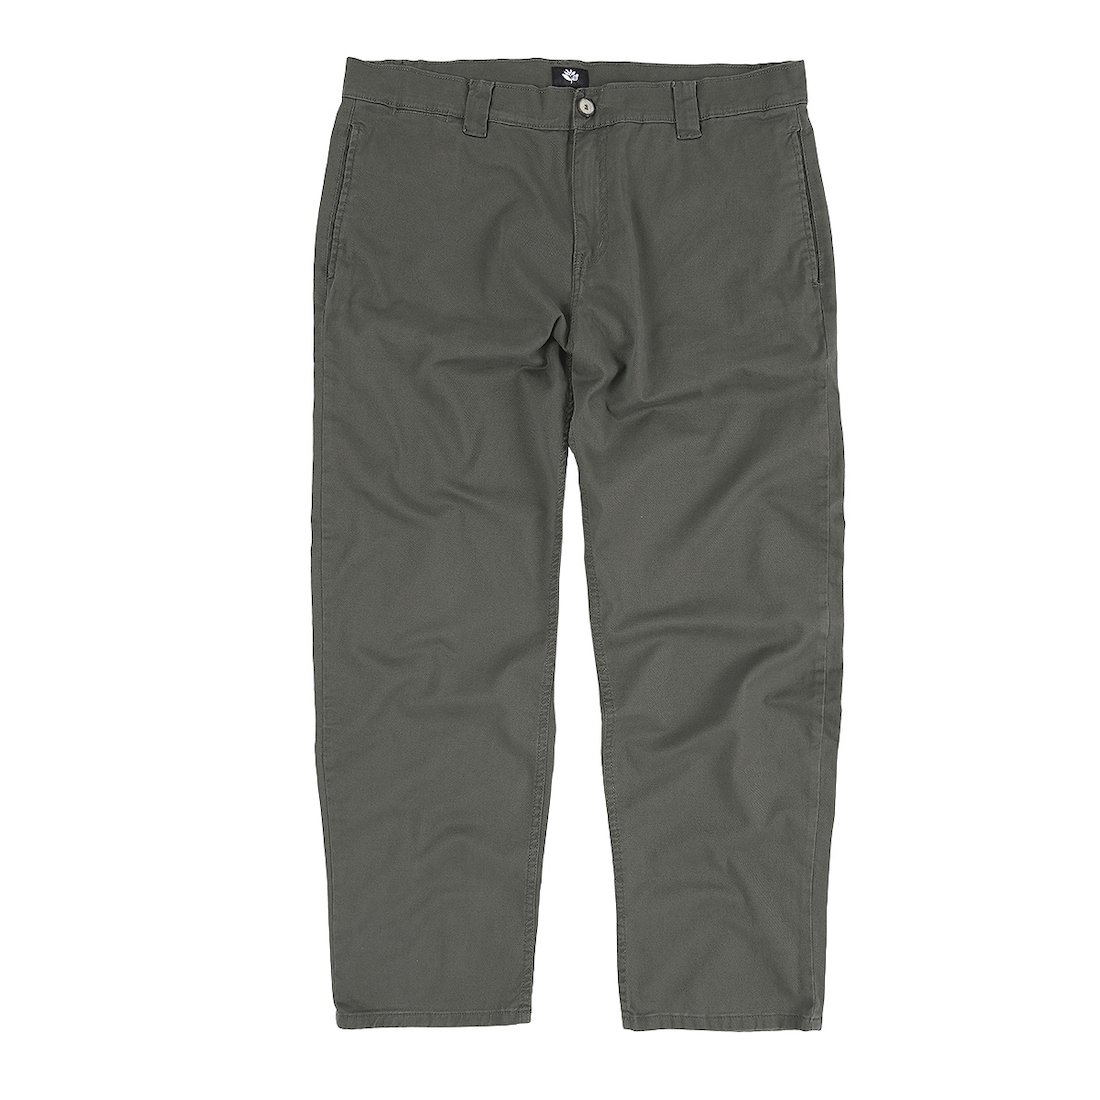 【Magenta Skateboards】ToucTouc Chino Pants - Green